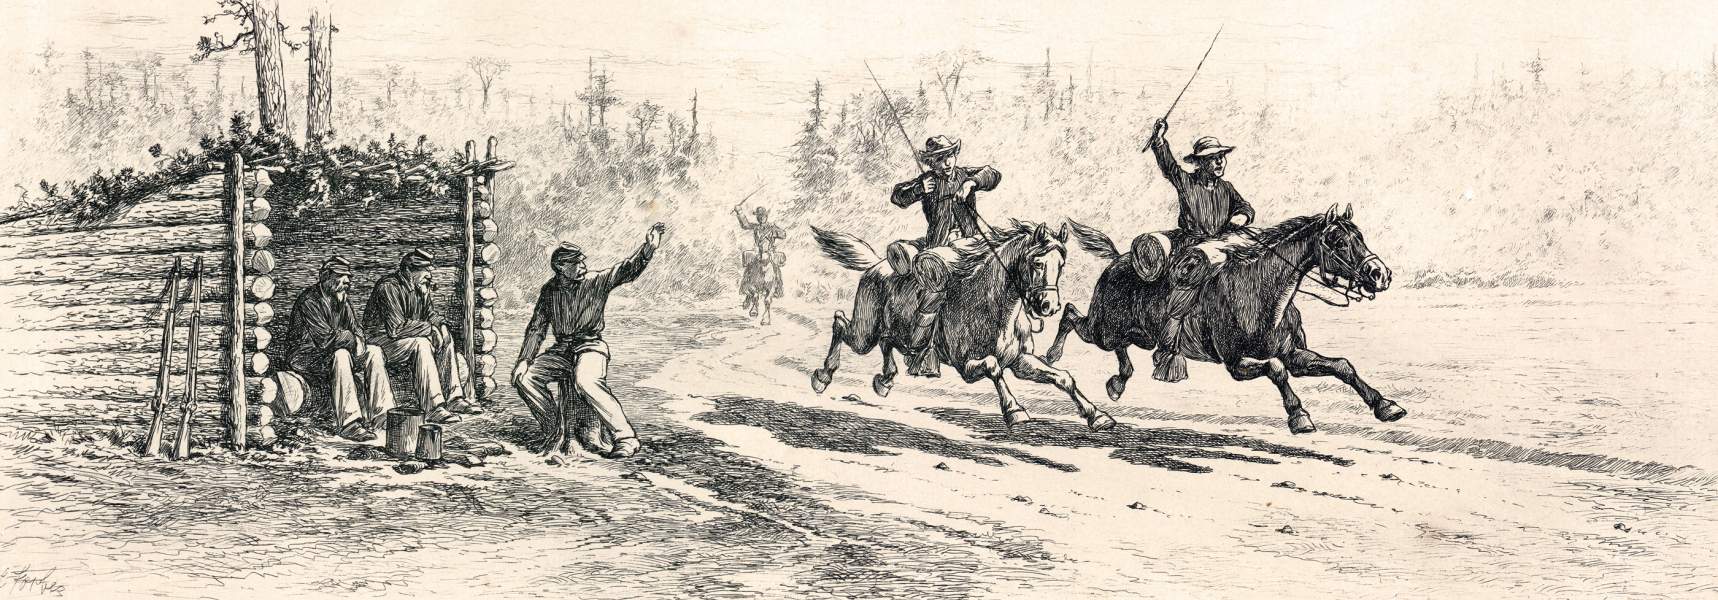 "A Race for Camp," Edwin Forbes, copper plate etching, 1876, zoomable image